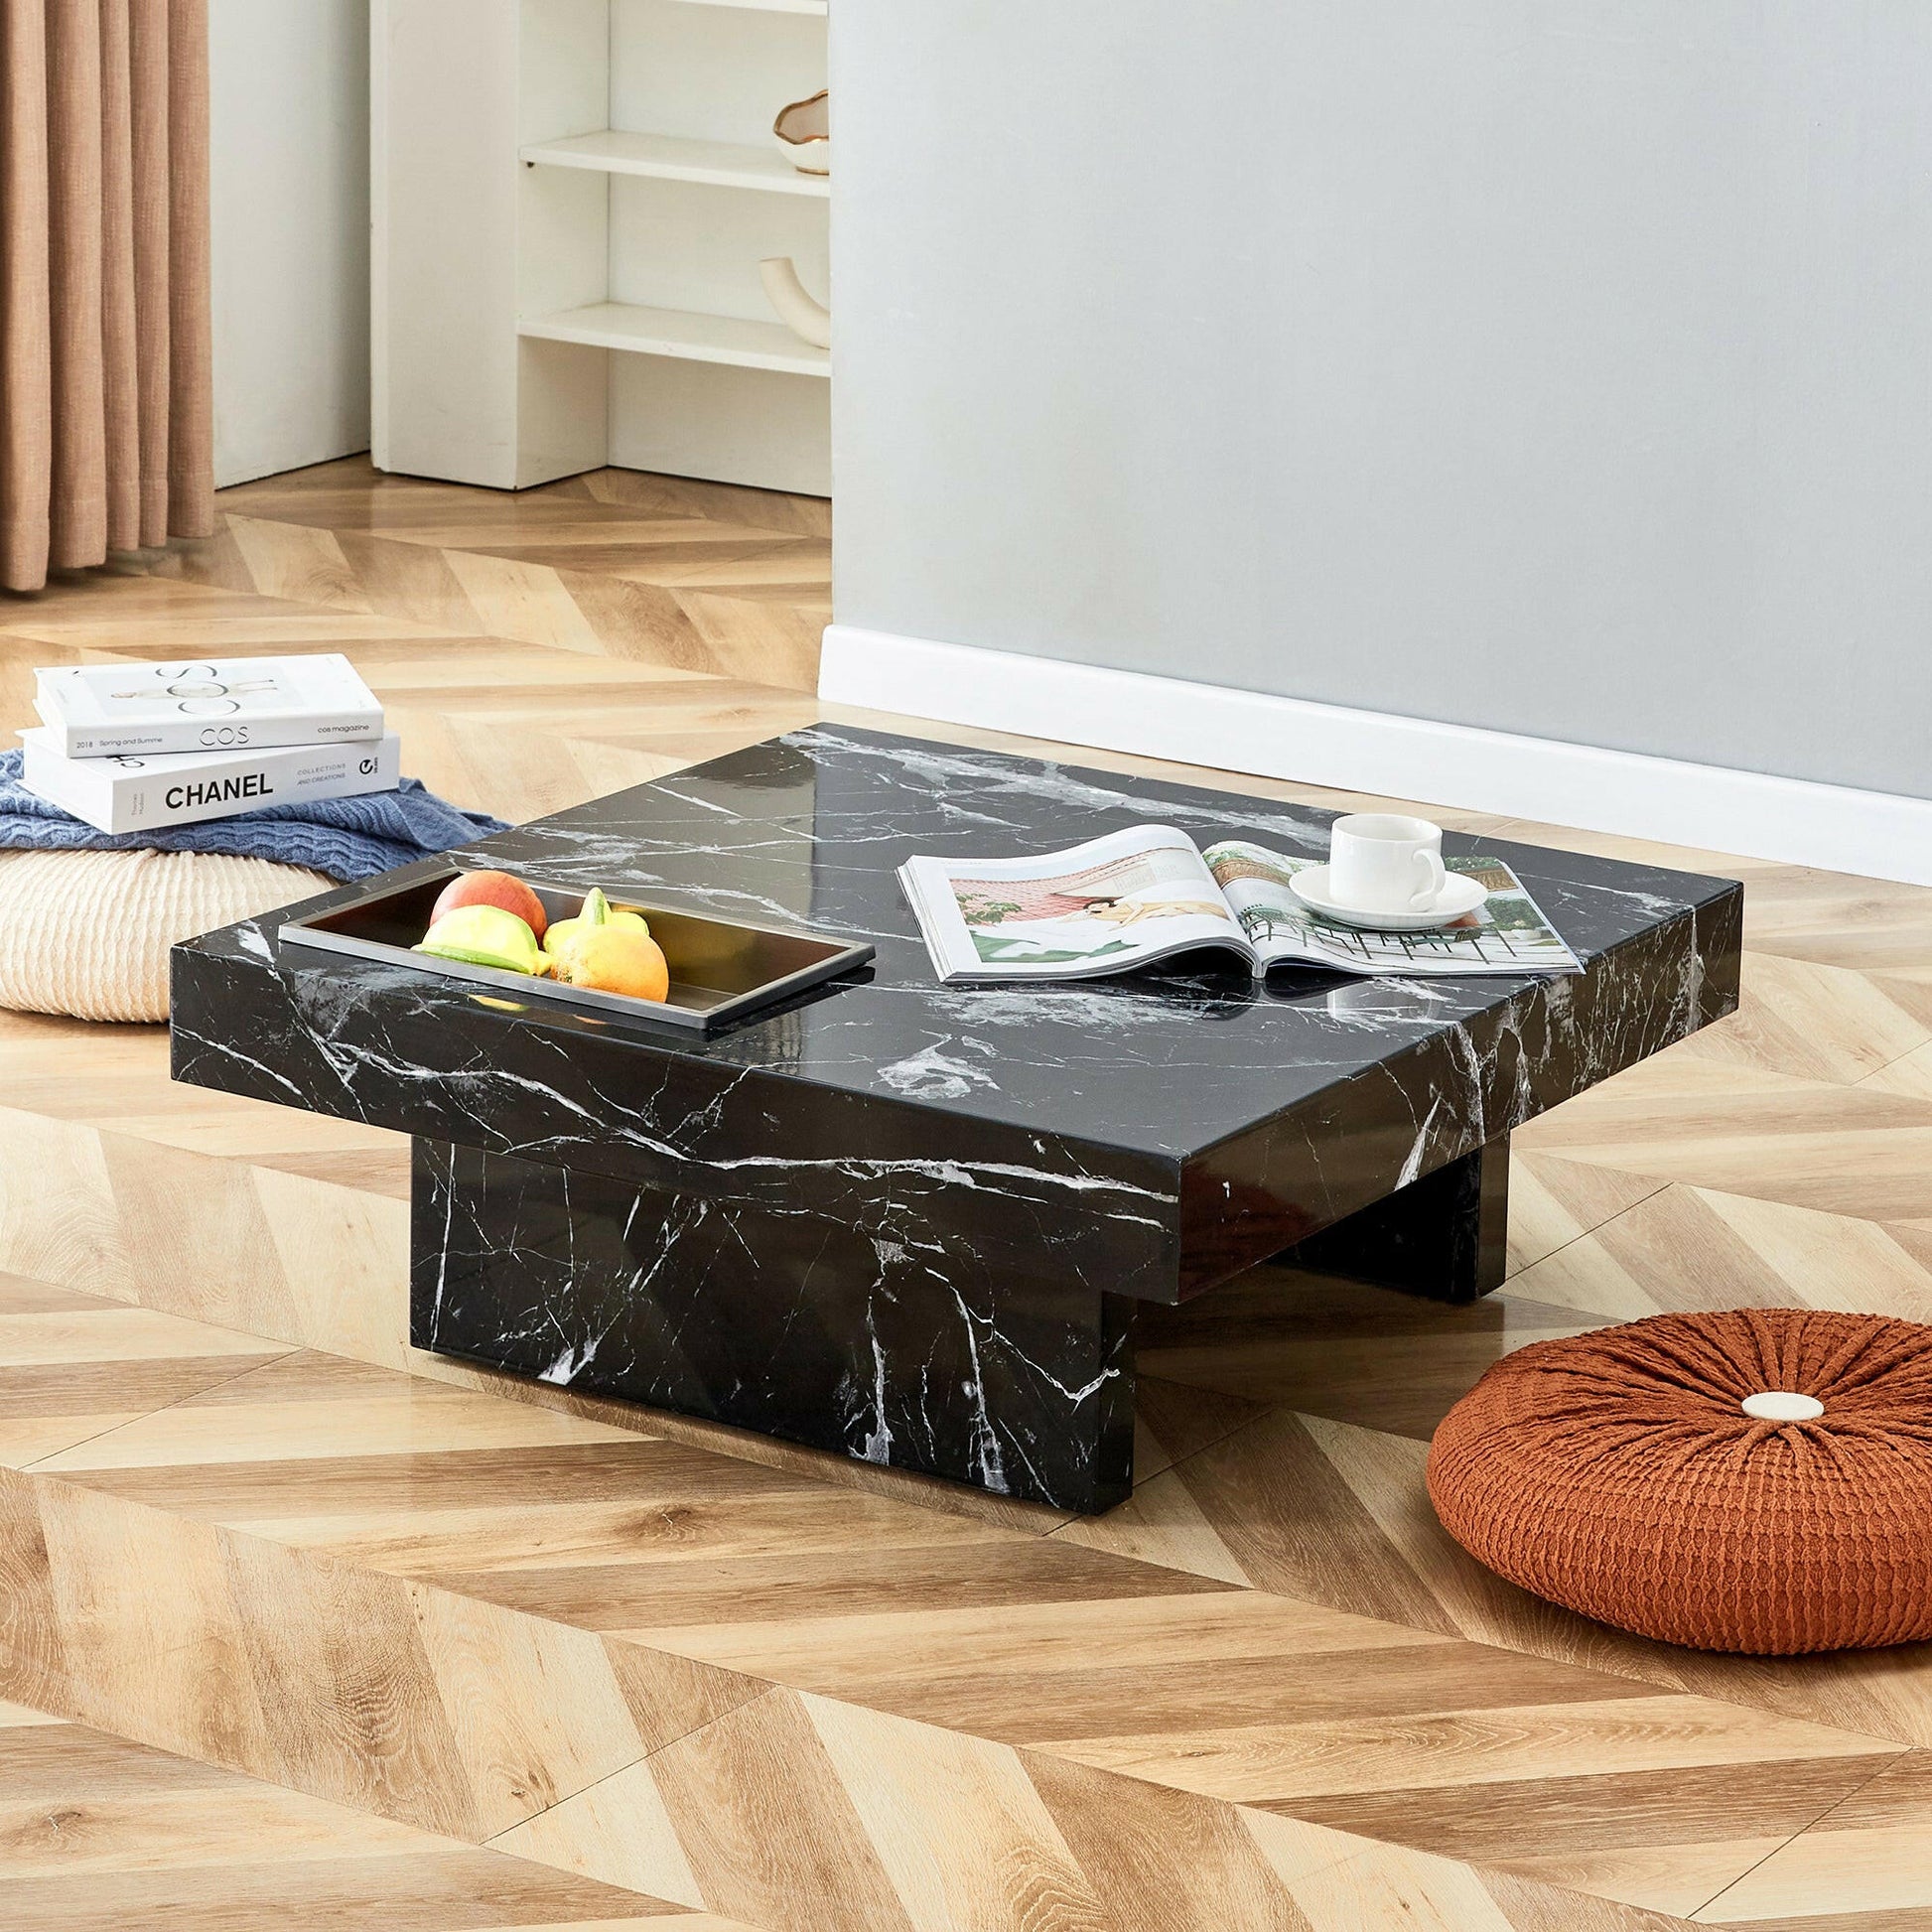 A modern and practical coffee table made of MDF material with black patterns